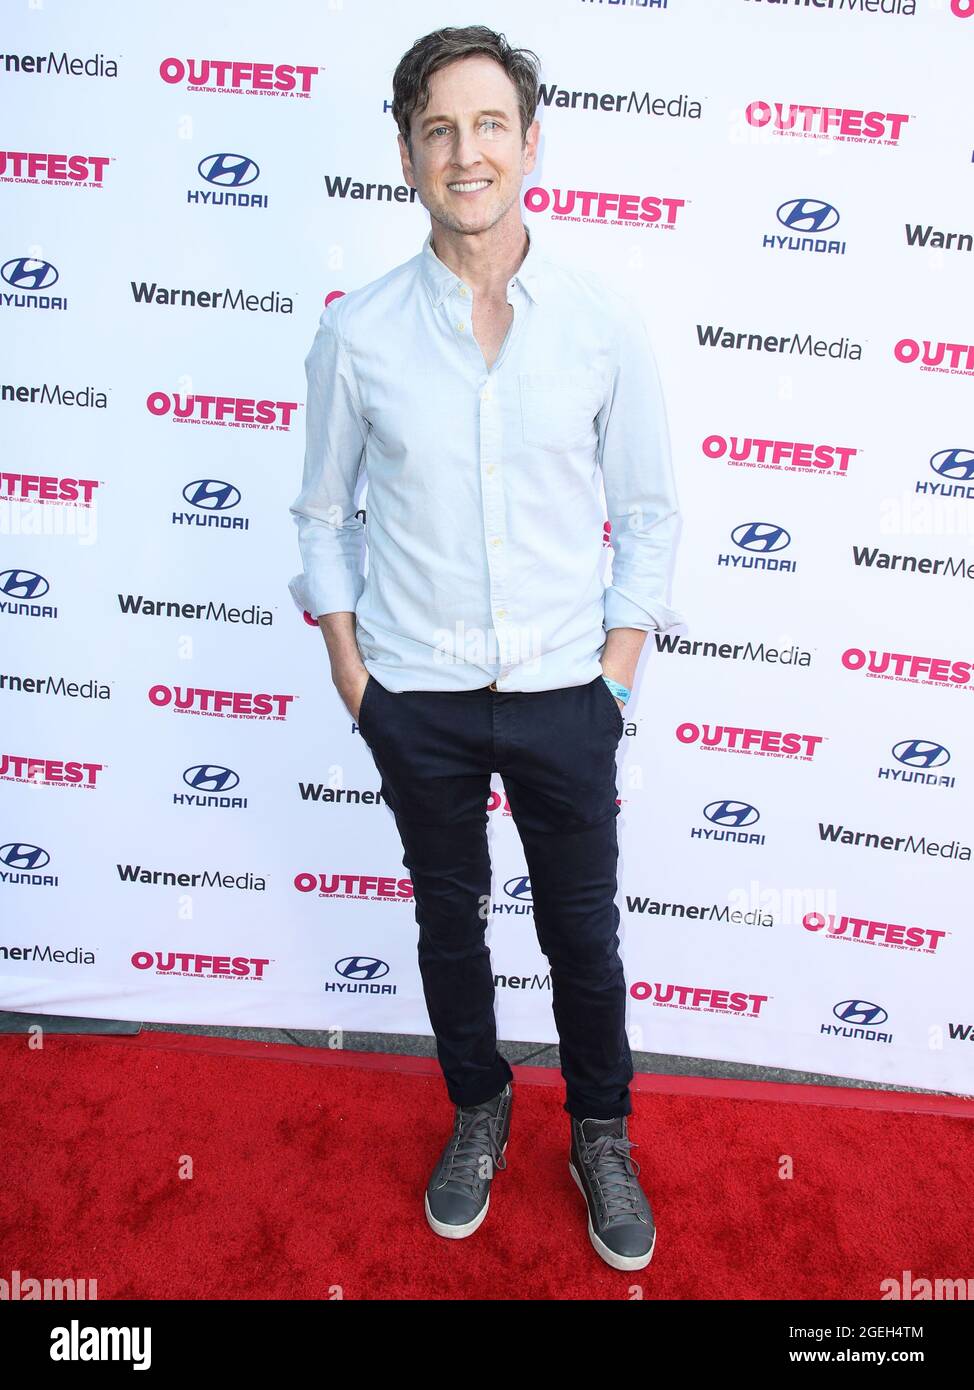 Los Angeles, United States. 19th Aug, 2021. LOS ANGELES, CALIFORNIA, USA - AUGUST 19: Actor Jack Plotnick arrives at the 2021 Outfest Los Angeles LGBTQ Film Festival Screening Of 'The Sixth Reel' held at the Directors Guild of America on August 19, 2021 in Los Angeles, California, United States. (Photo by Xavier Collin/Image Press Agency/Sipa USA) Credit: Sipa USA/Alamy Live News Stock Photo